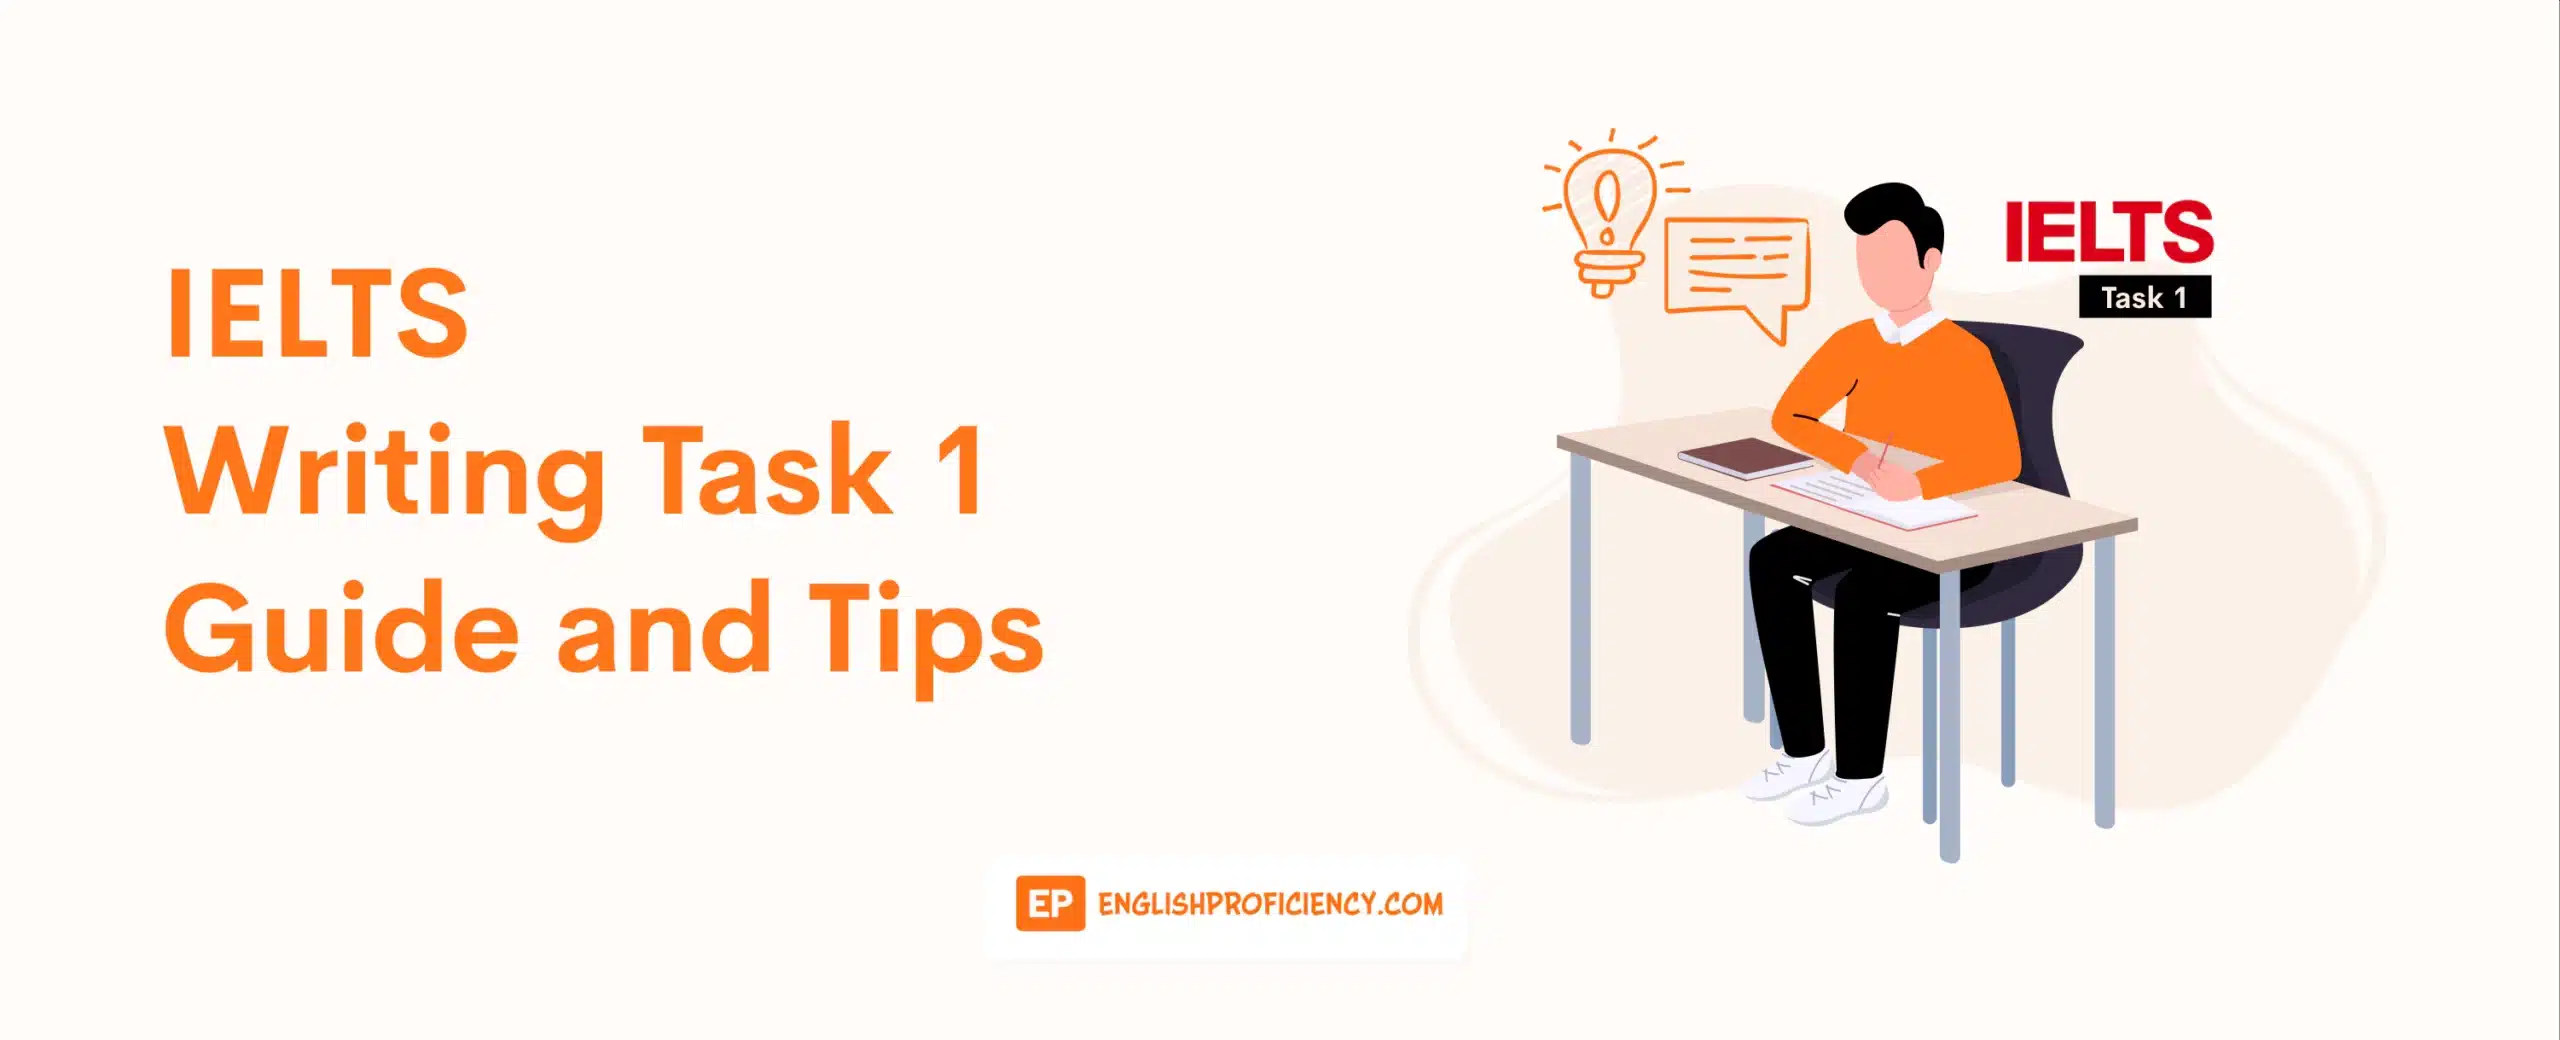 IELTS Writing Task 1 Guide and Tips